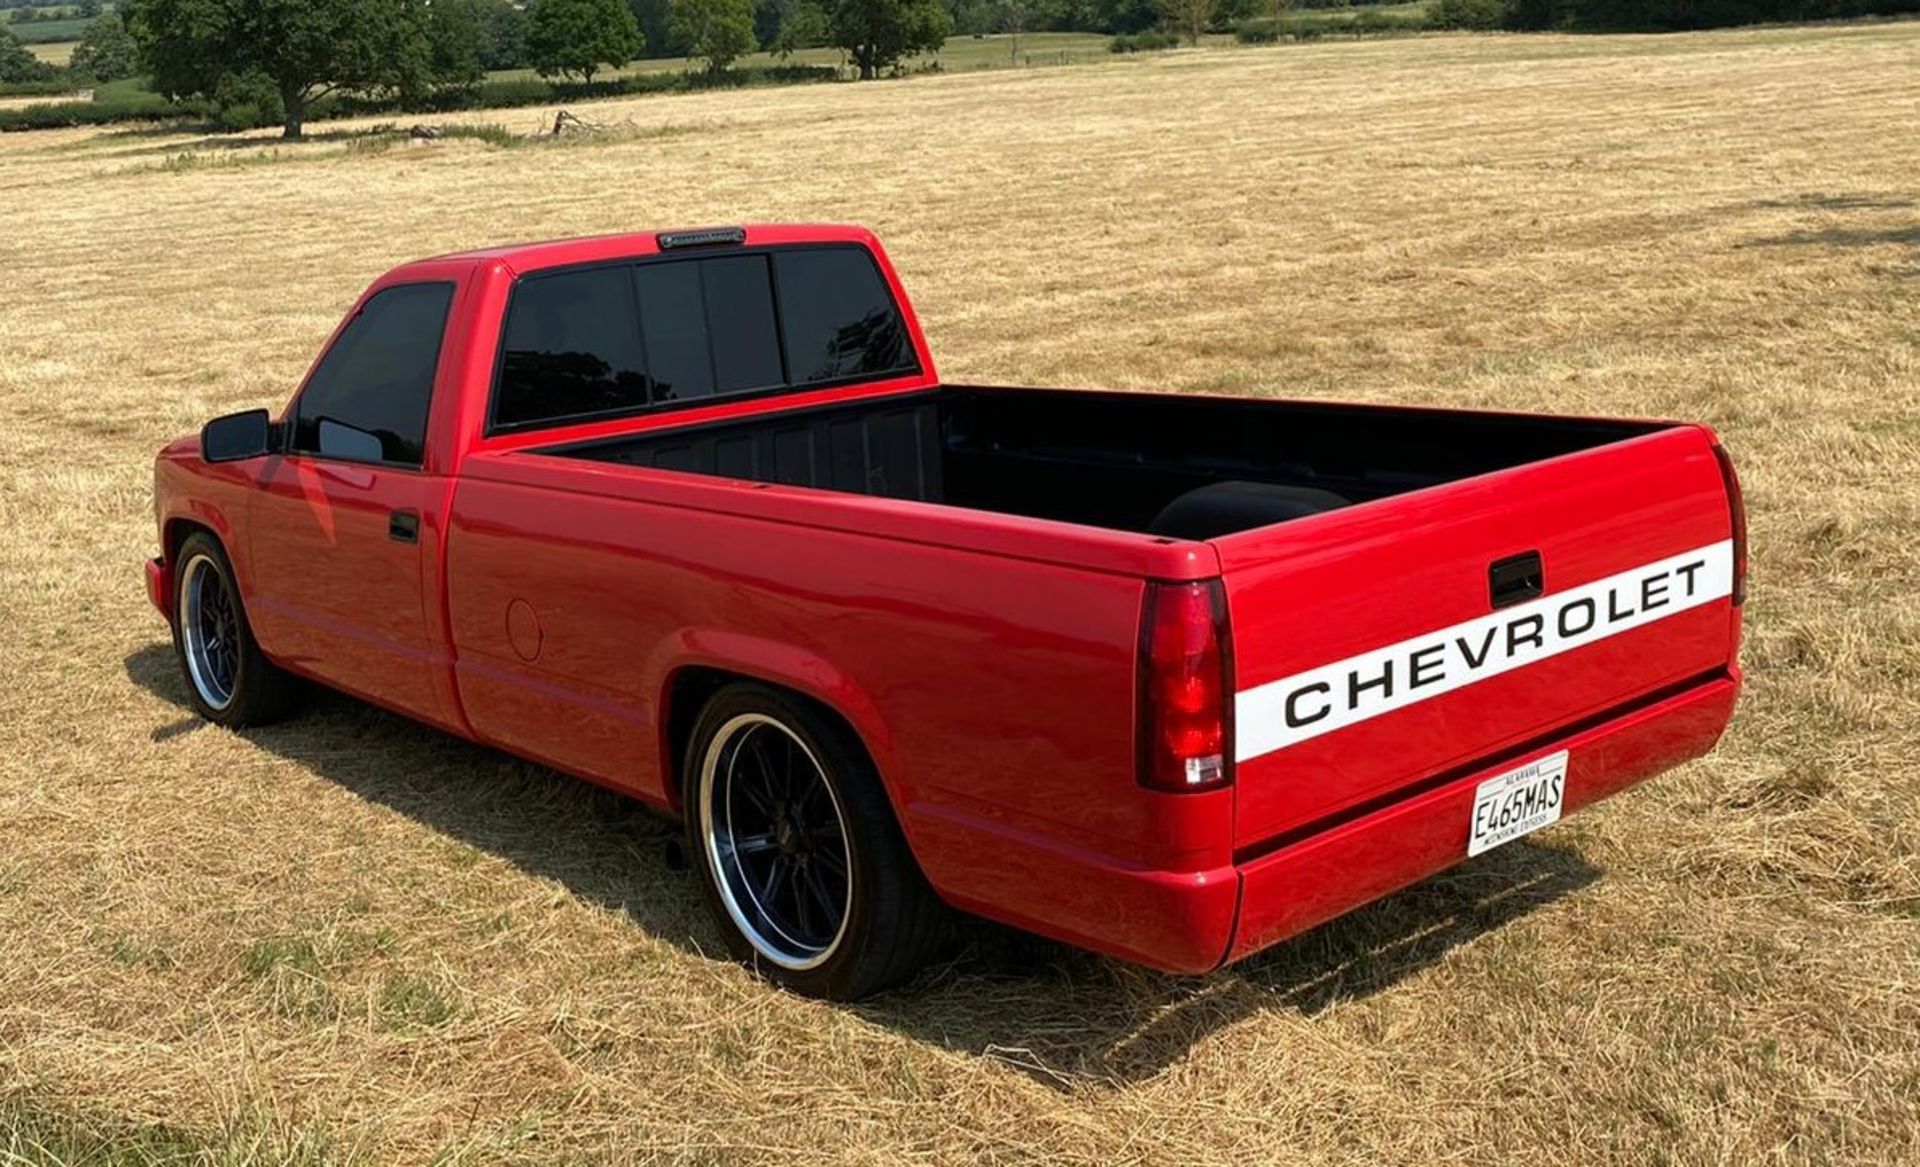 Super Red 1988 Chevrolet C1500 / OBS / GMT-400 - Single cab long bed (8ft) - Image 3 of 15